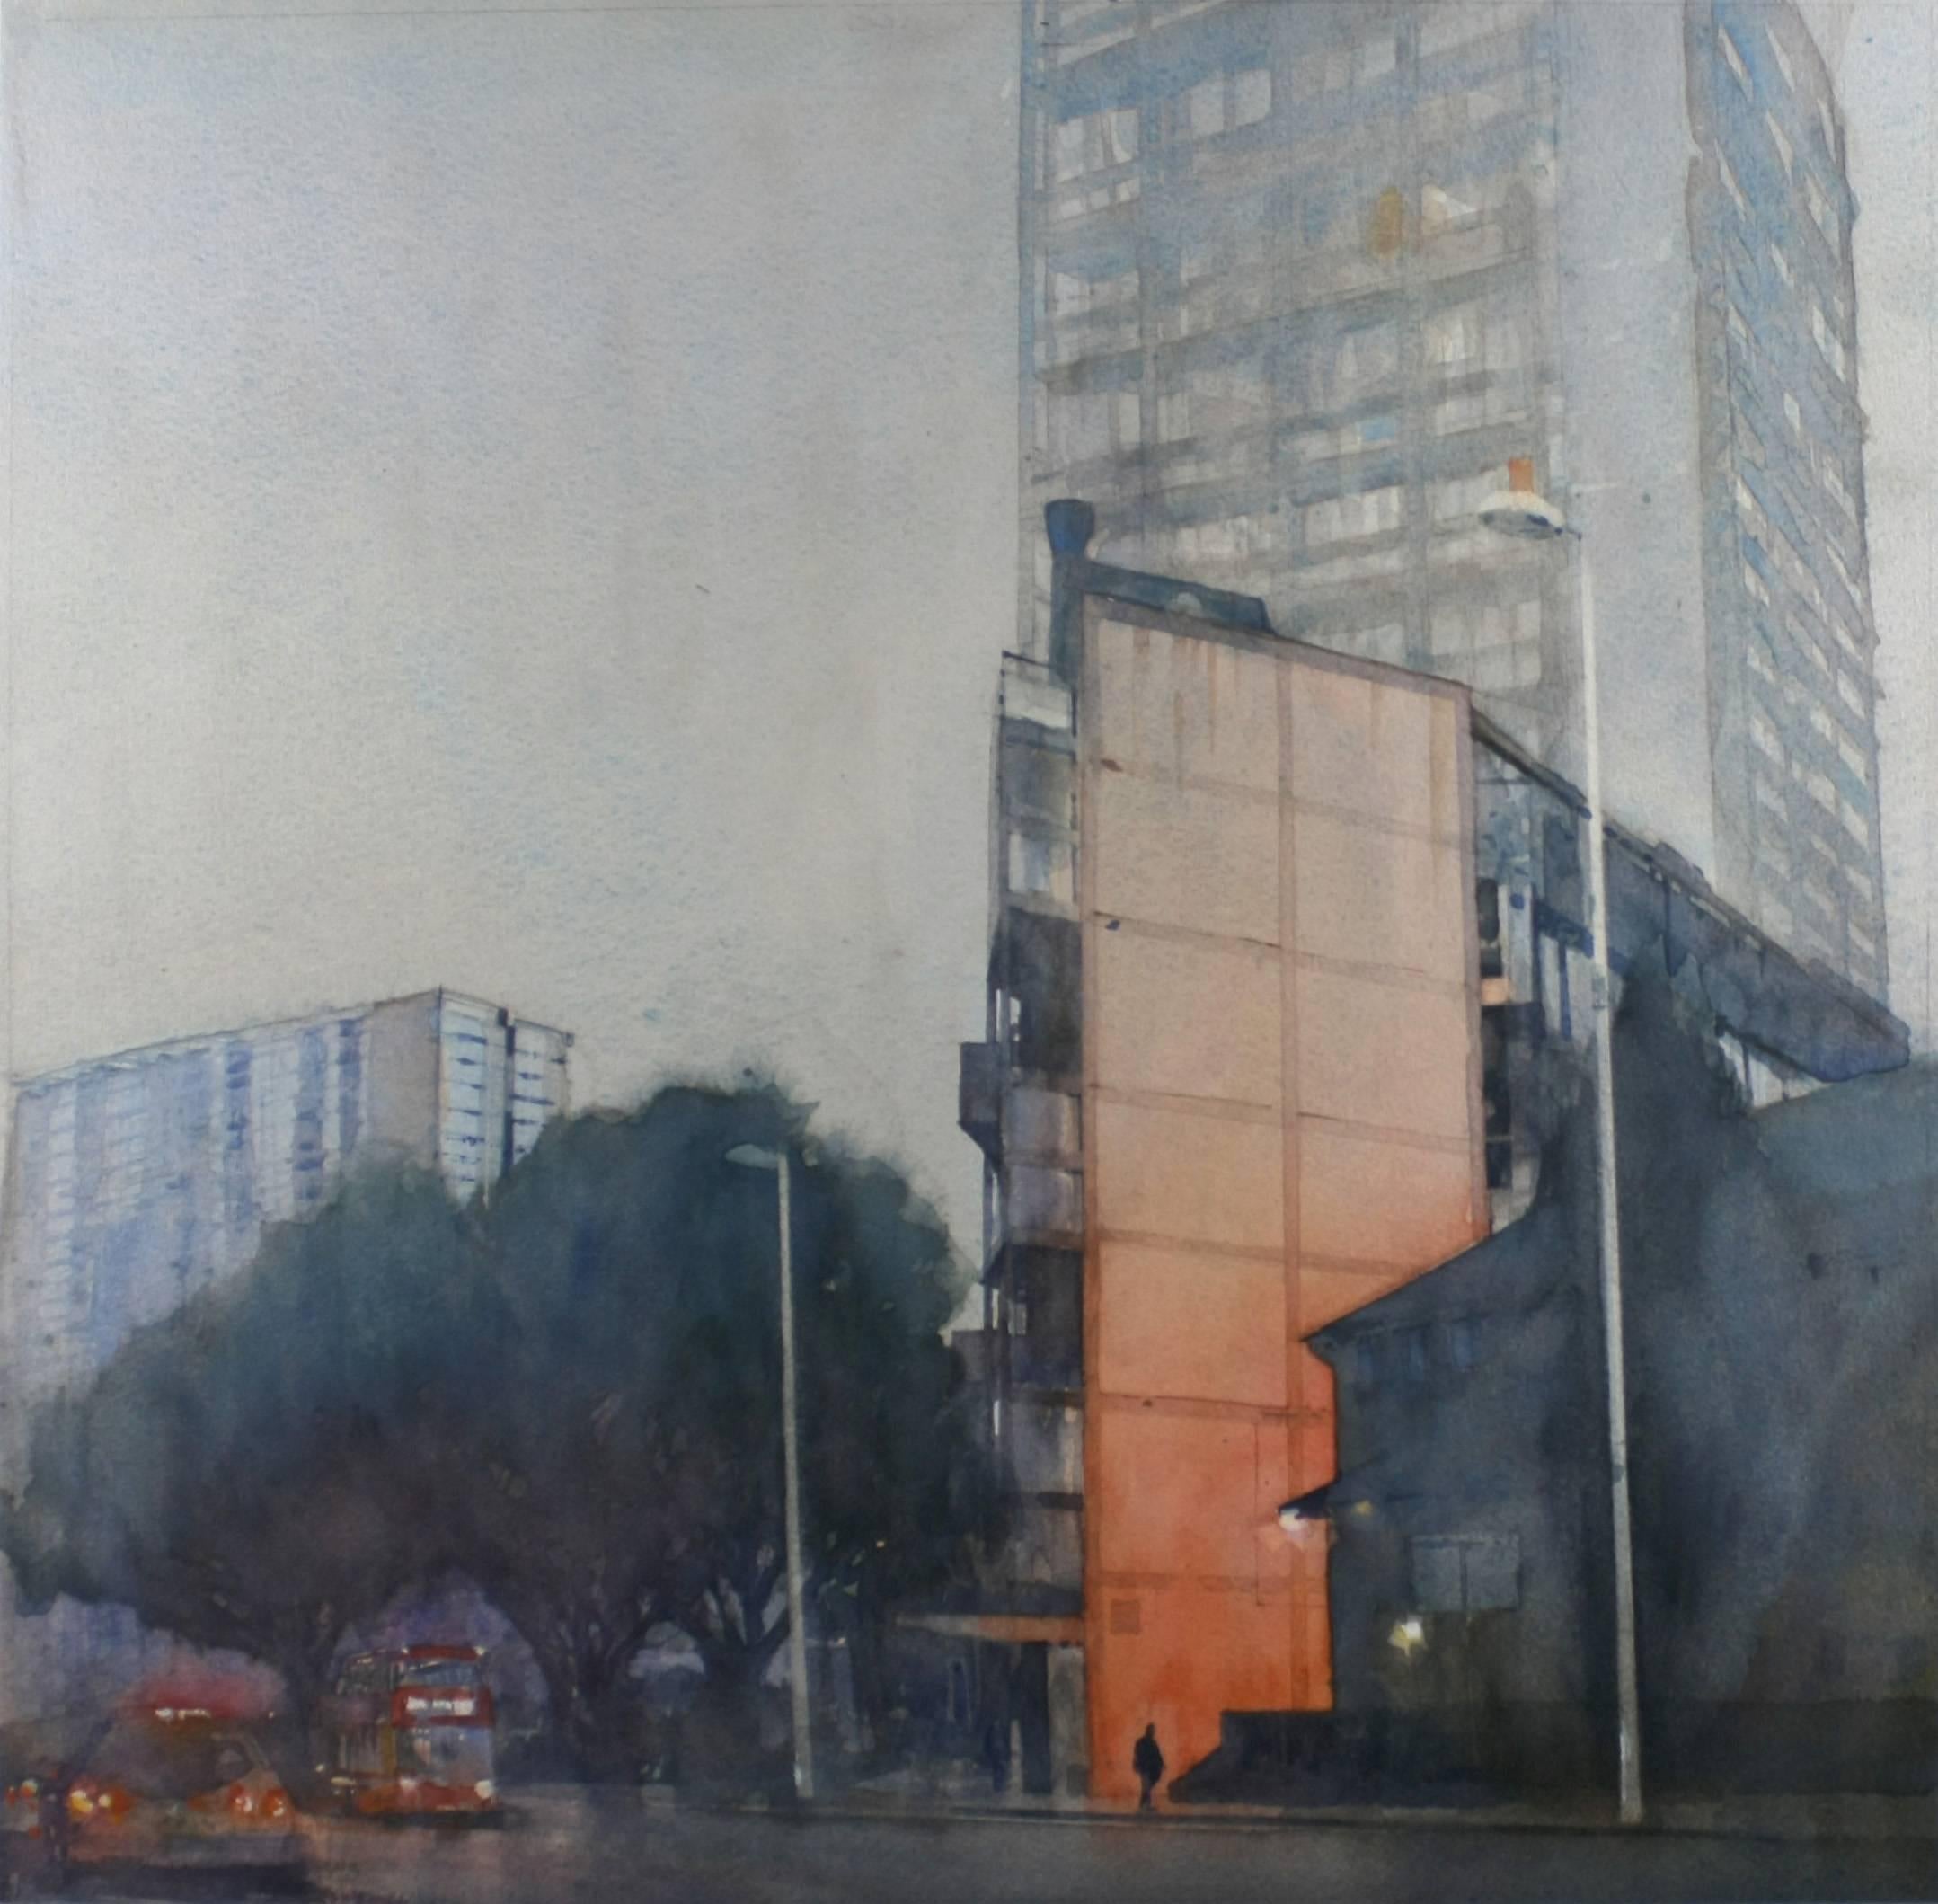 Morning Light - illustrative cityscape tower architecture watercolour on paper